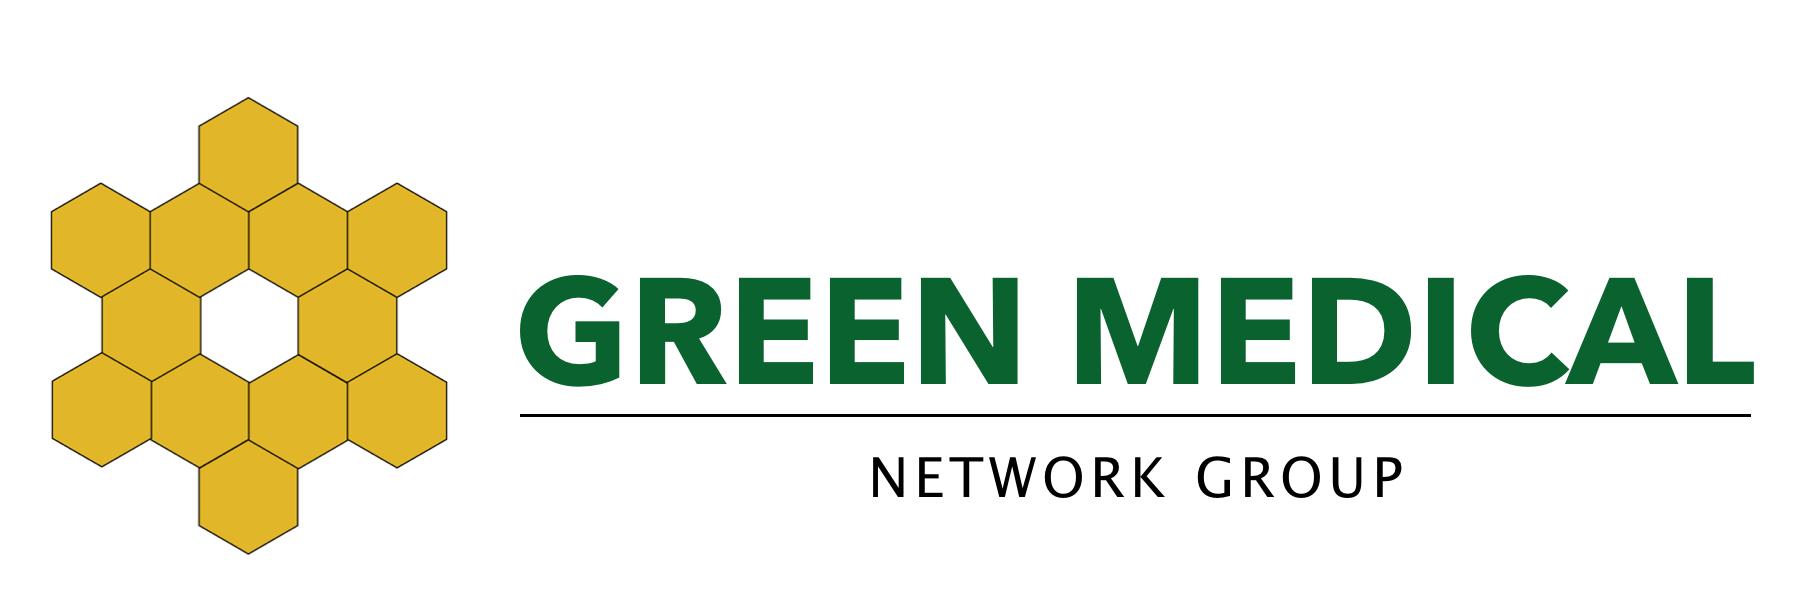 Green Medical Network Group